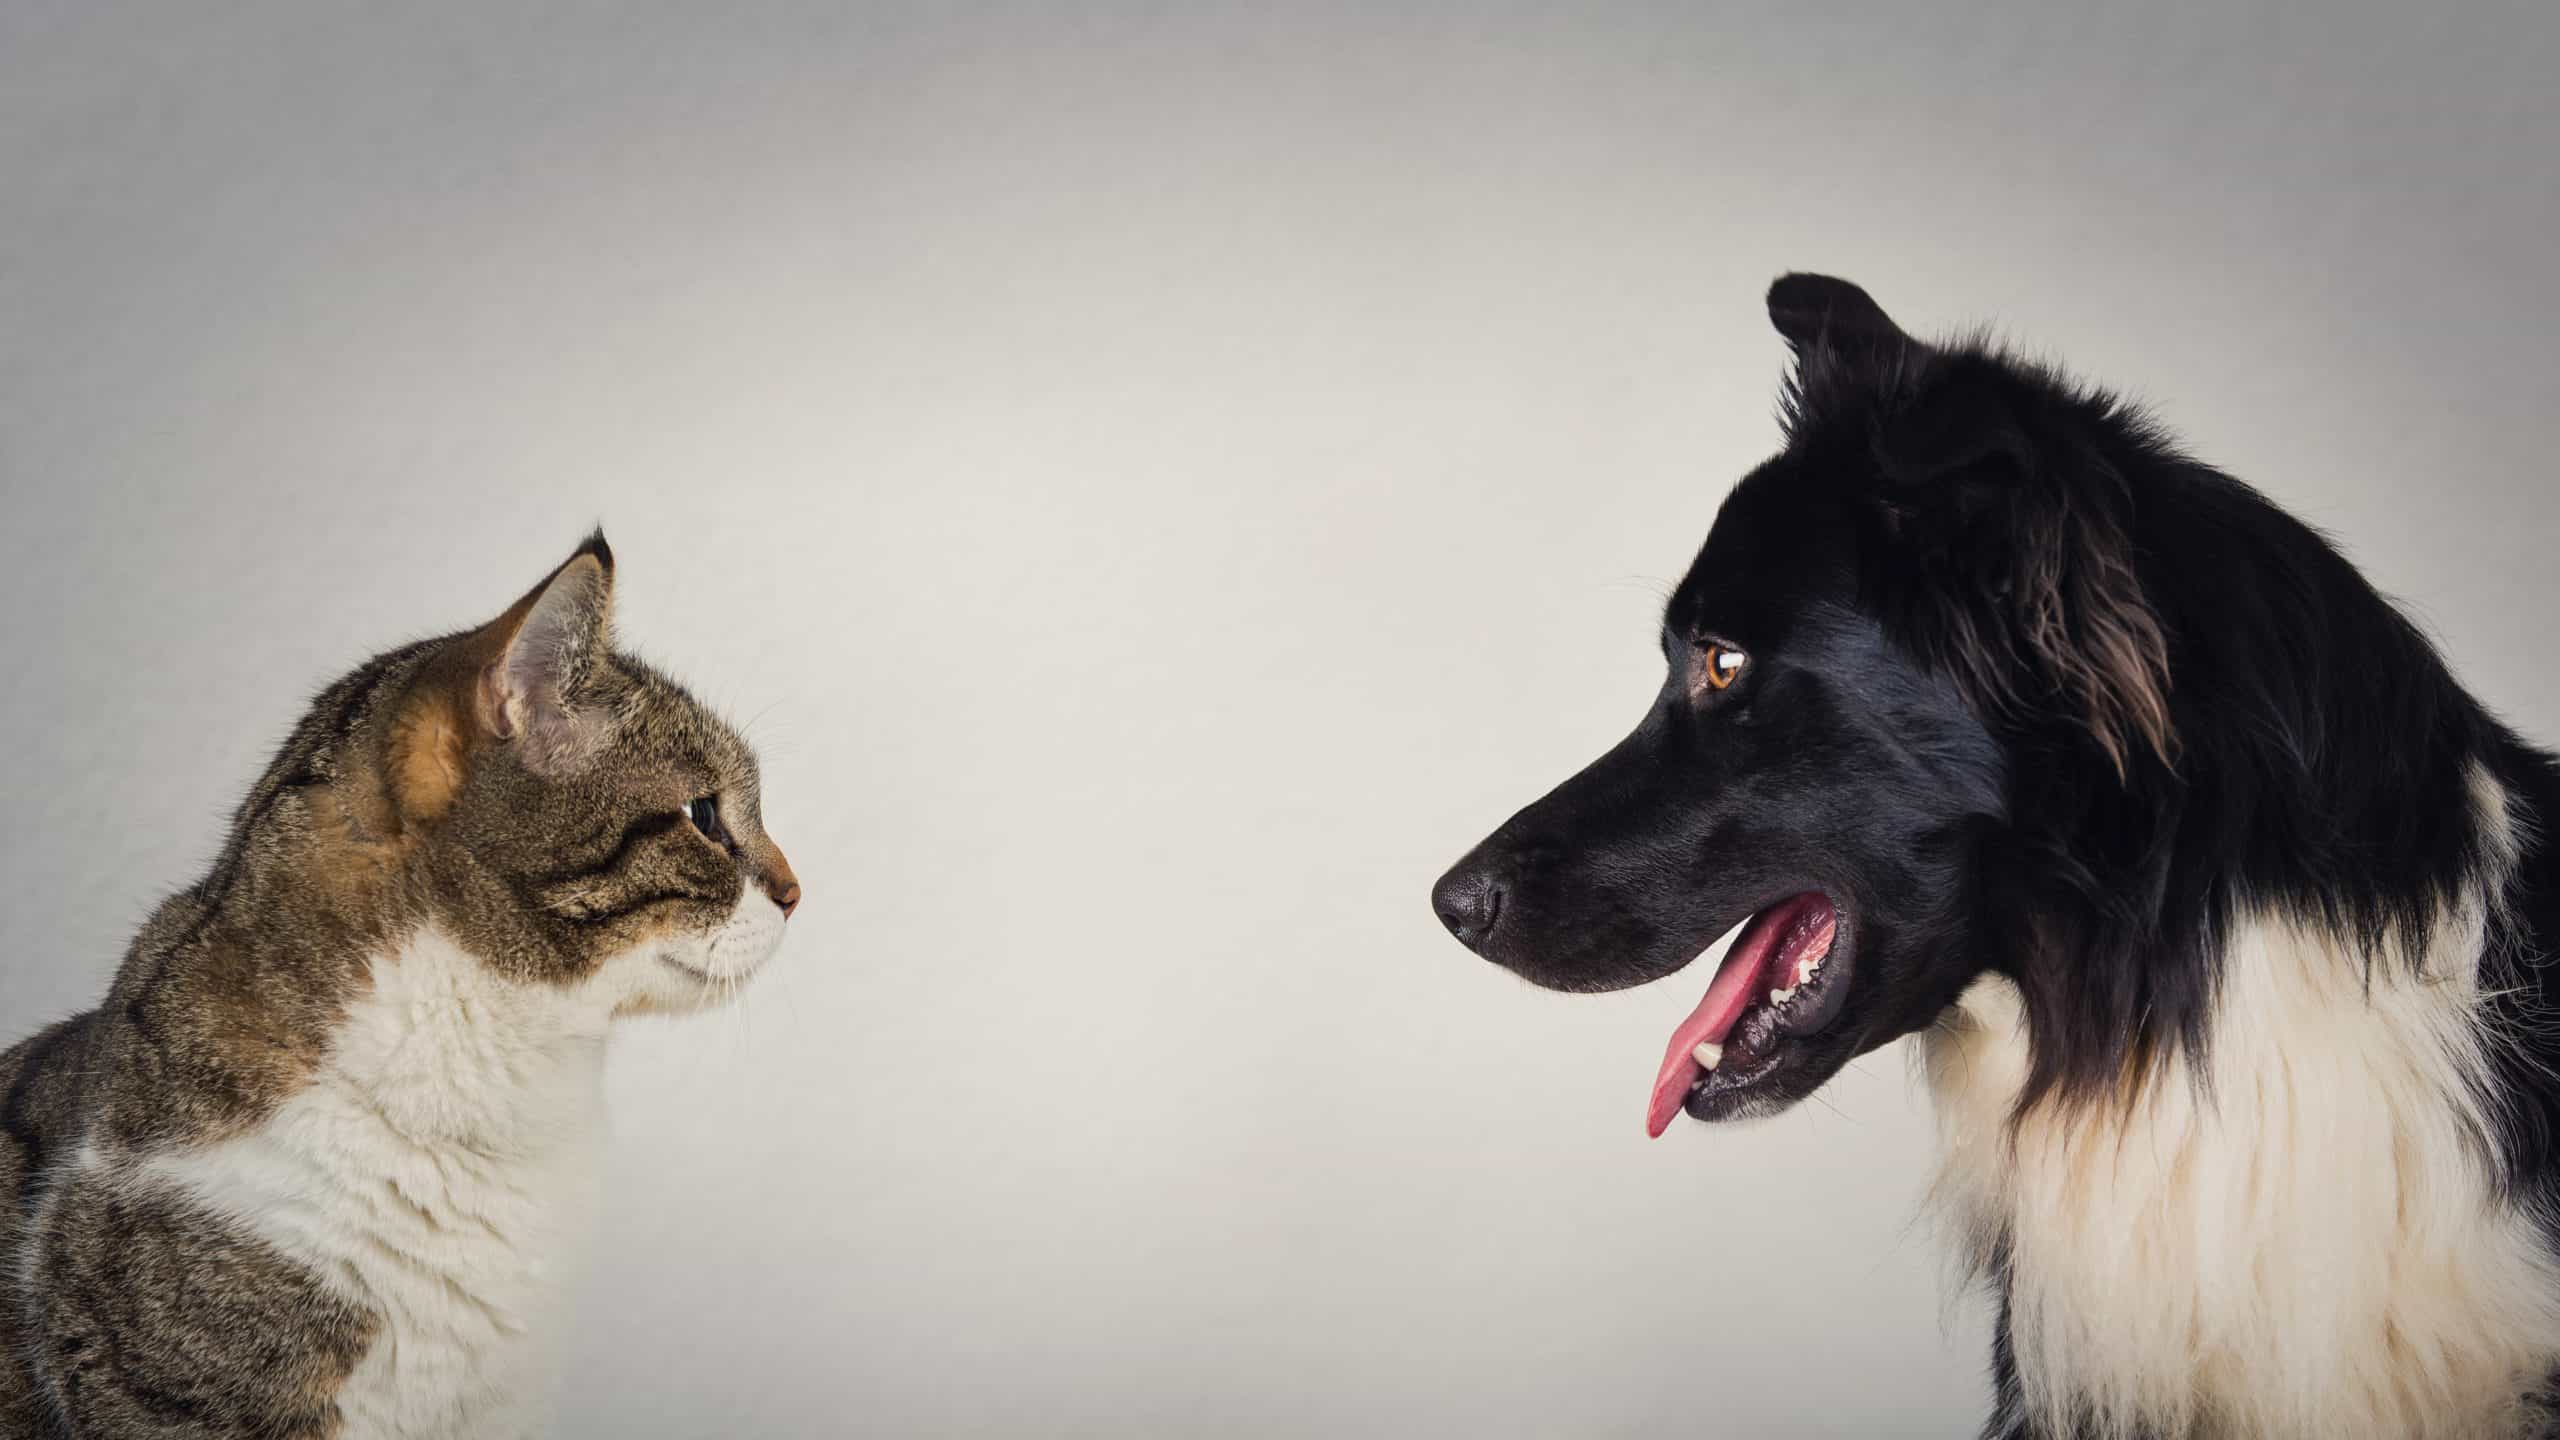 Cats vs. dogs Differences include size, food, communication styles